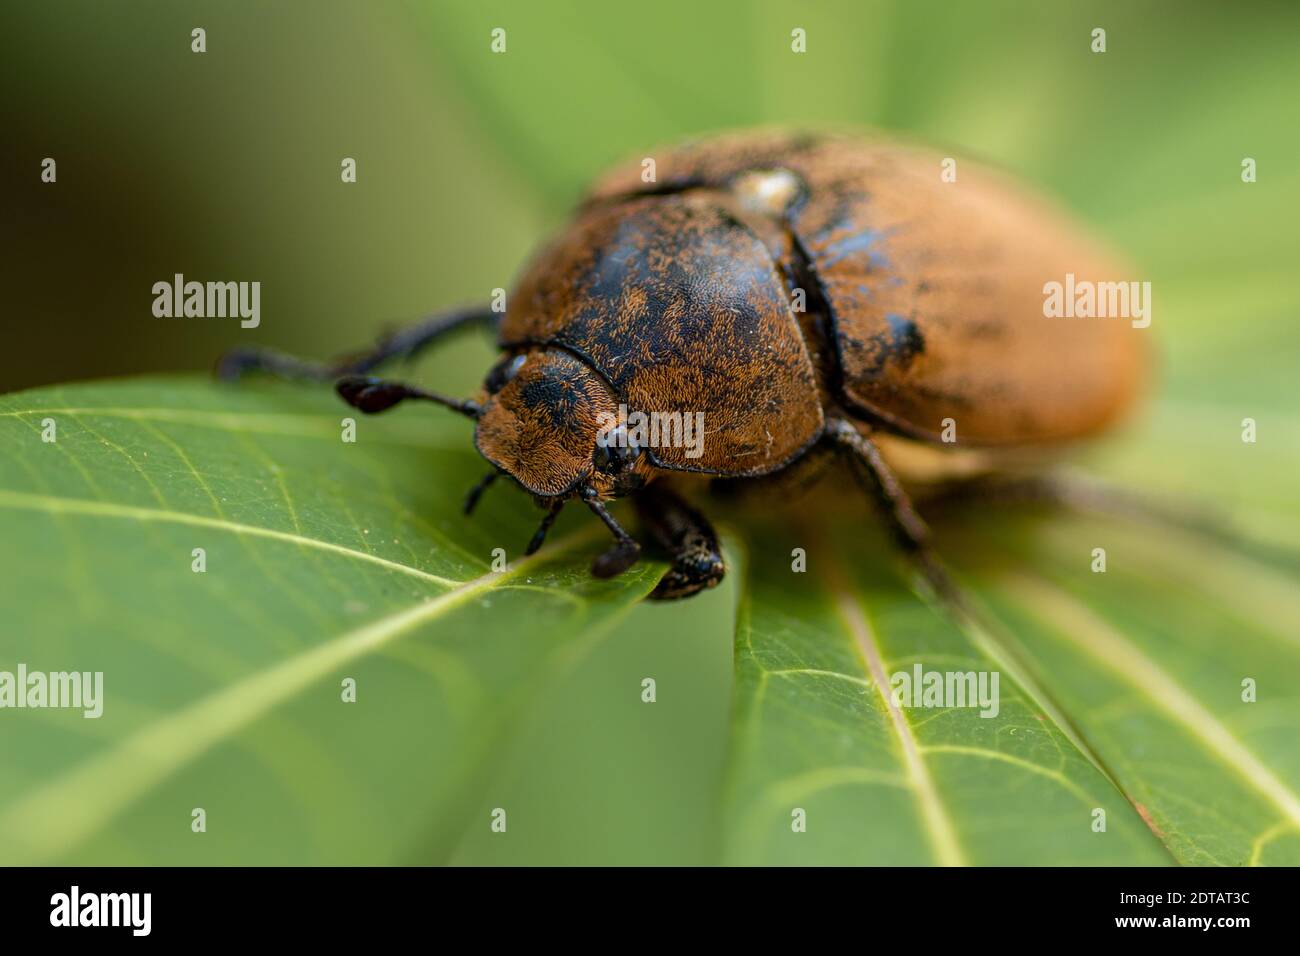 European chafer beetle on a green leaf closeup front body parts macro photo, old hairy beetle looking for food. Stock Photo